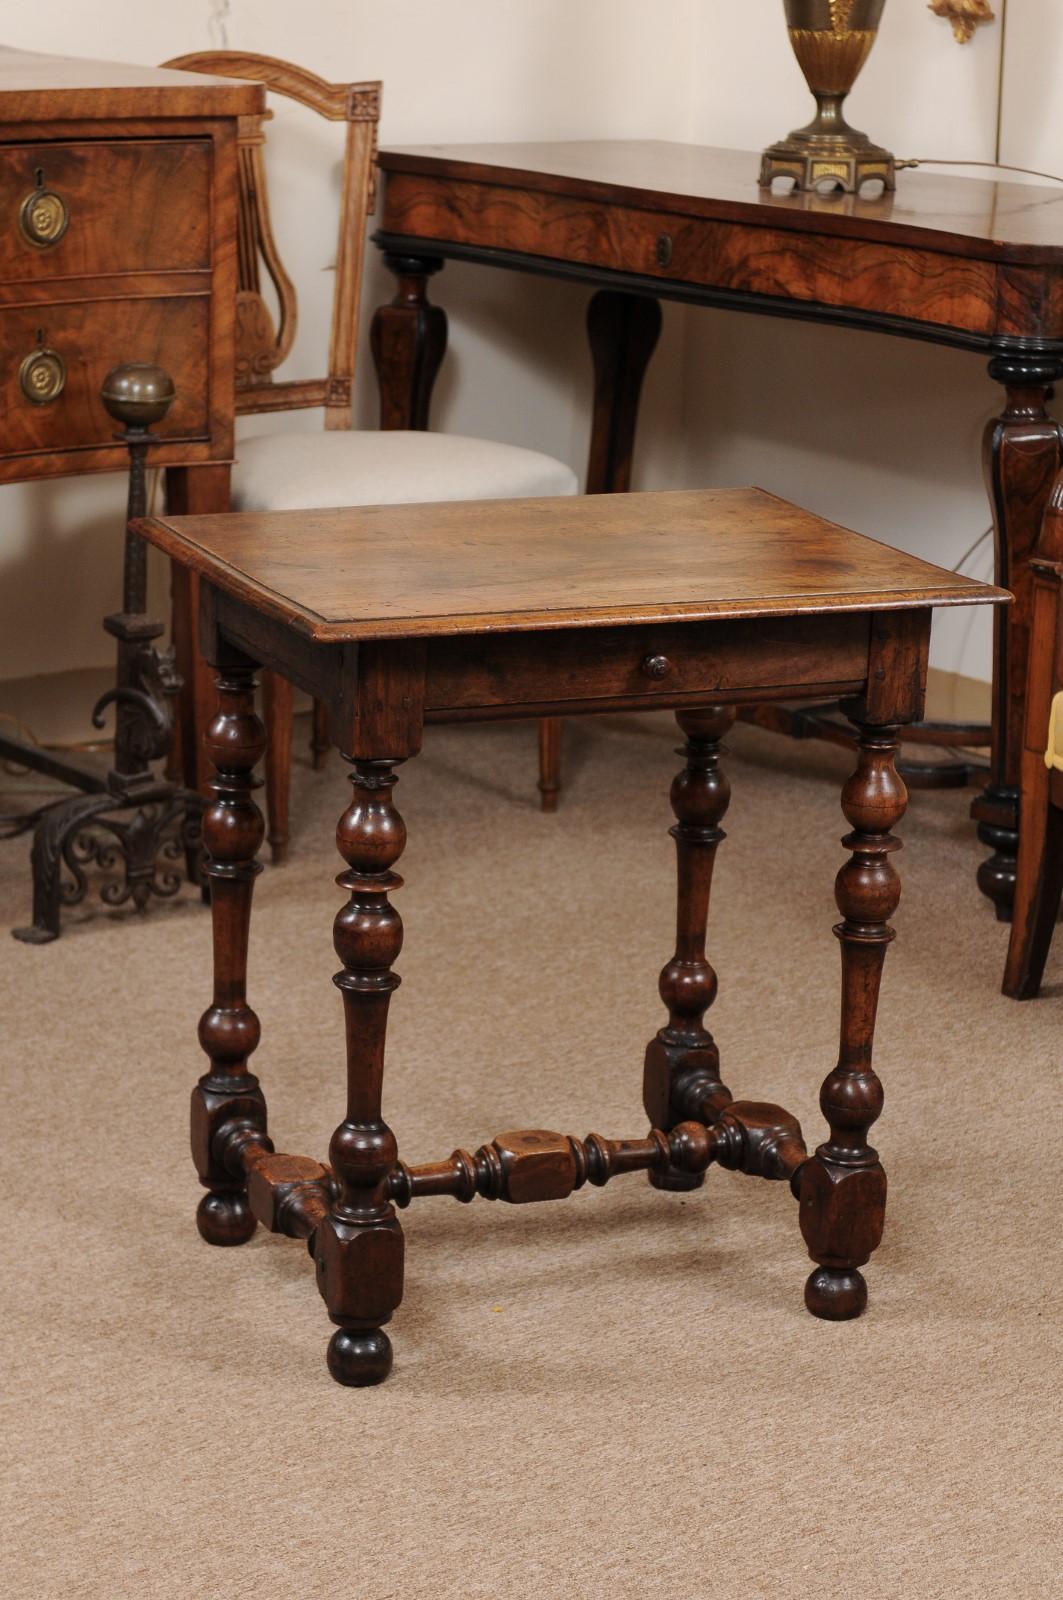 A Louis XIII style French walnut side table with drawer, turned legs joined by stretcher and ending in bun feet. The table dates from the 18th century.